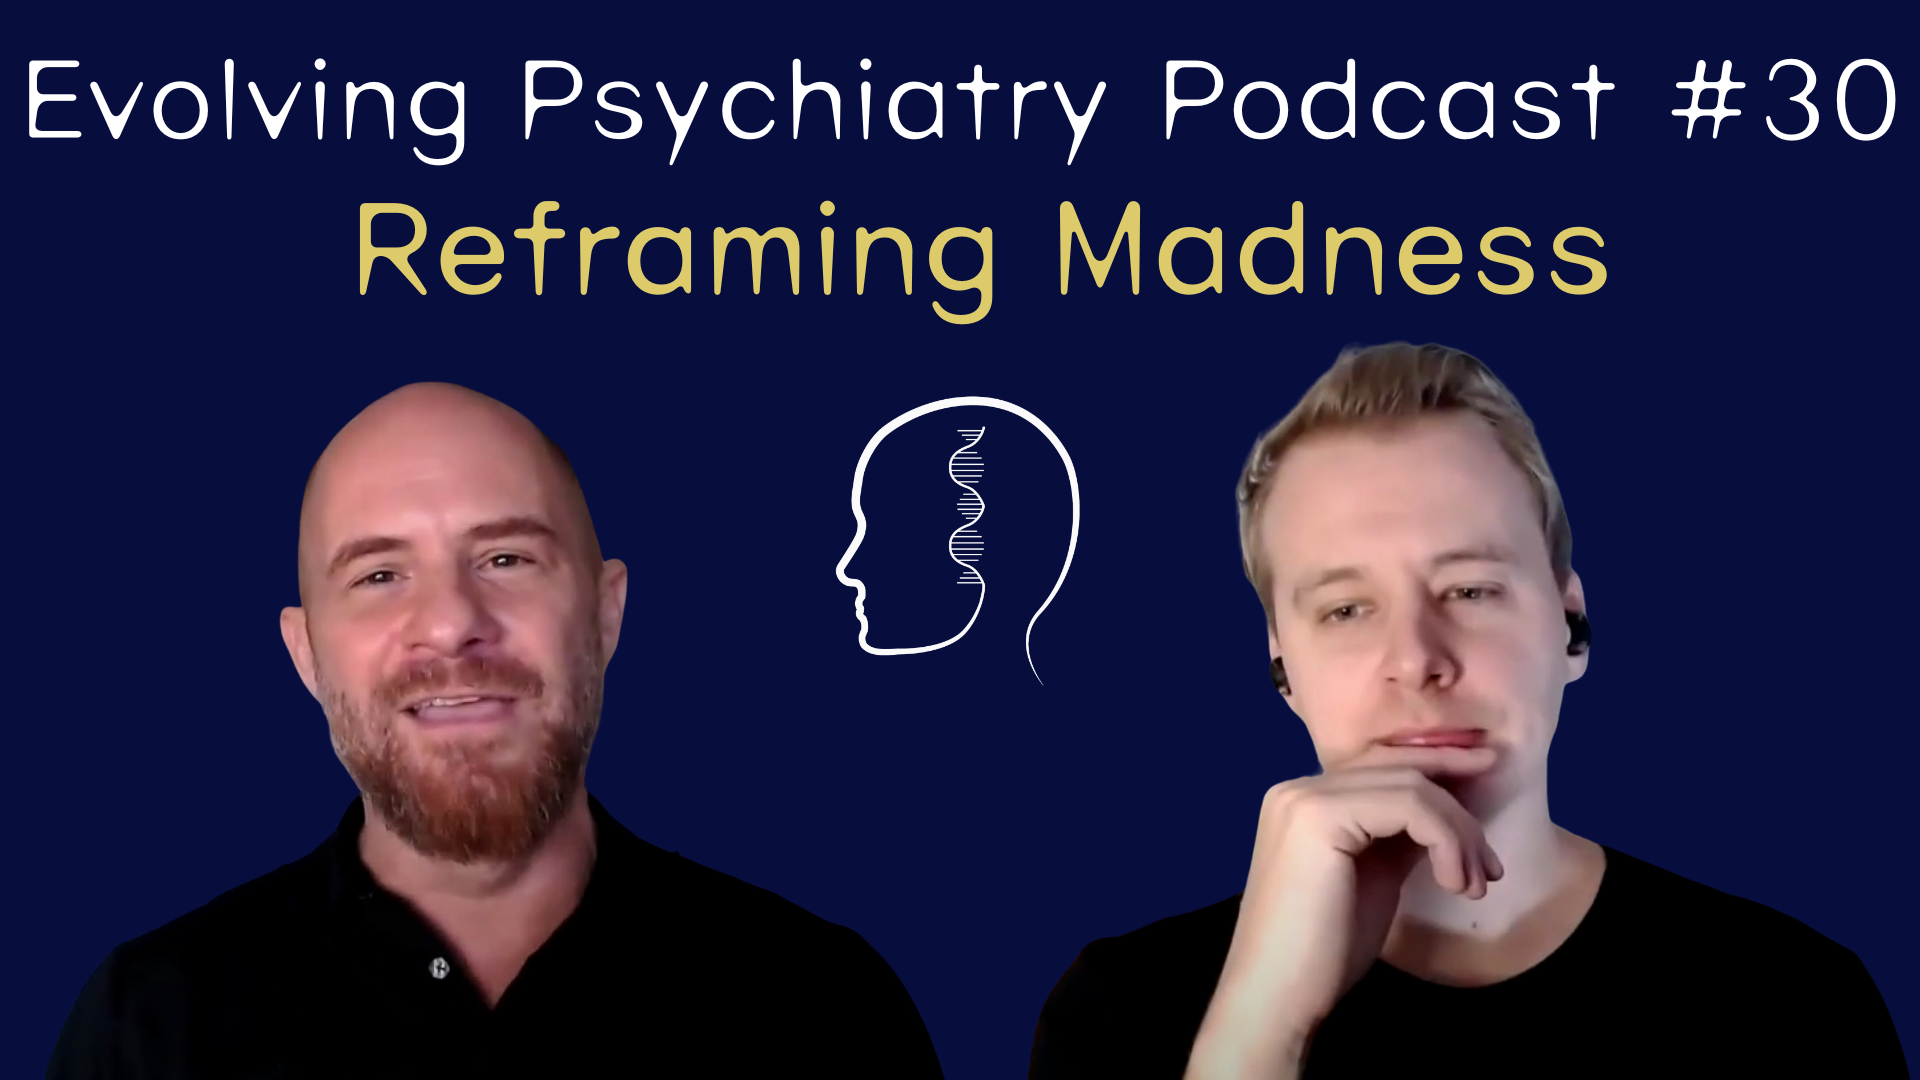    Reframing Madness    October 29, 2023  I spoke with Adam Hunt of the Evolving Psychiatry Podcast on scientific concepts of dysfunction, the role of the paradigms framing psychiatry, and the possible benefits of evolutionary thinking about mental '